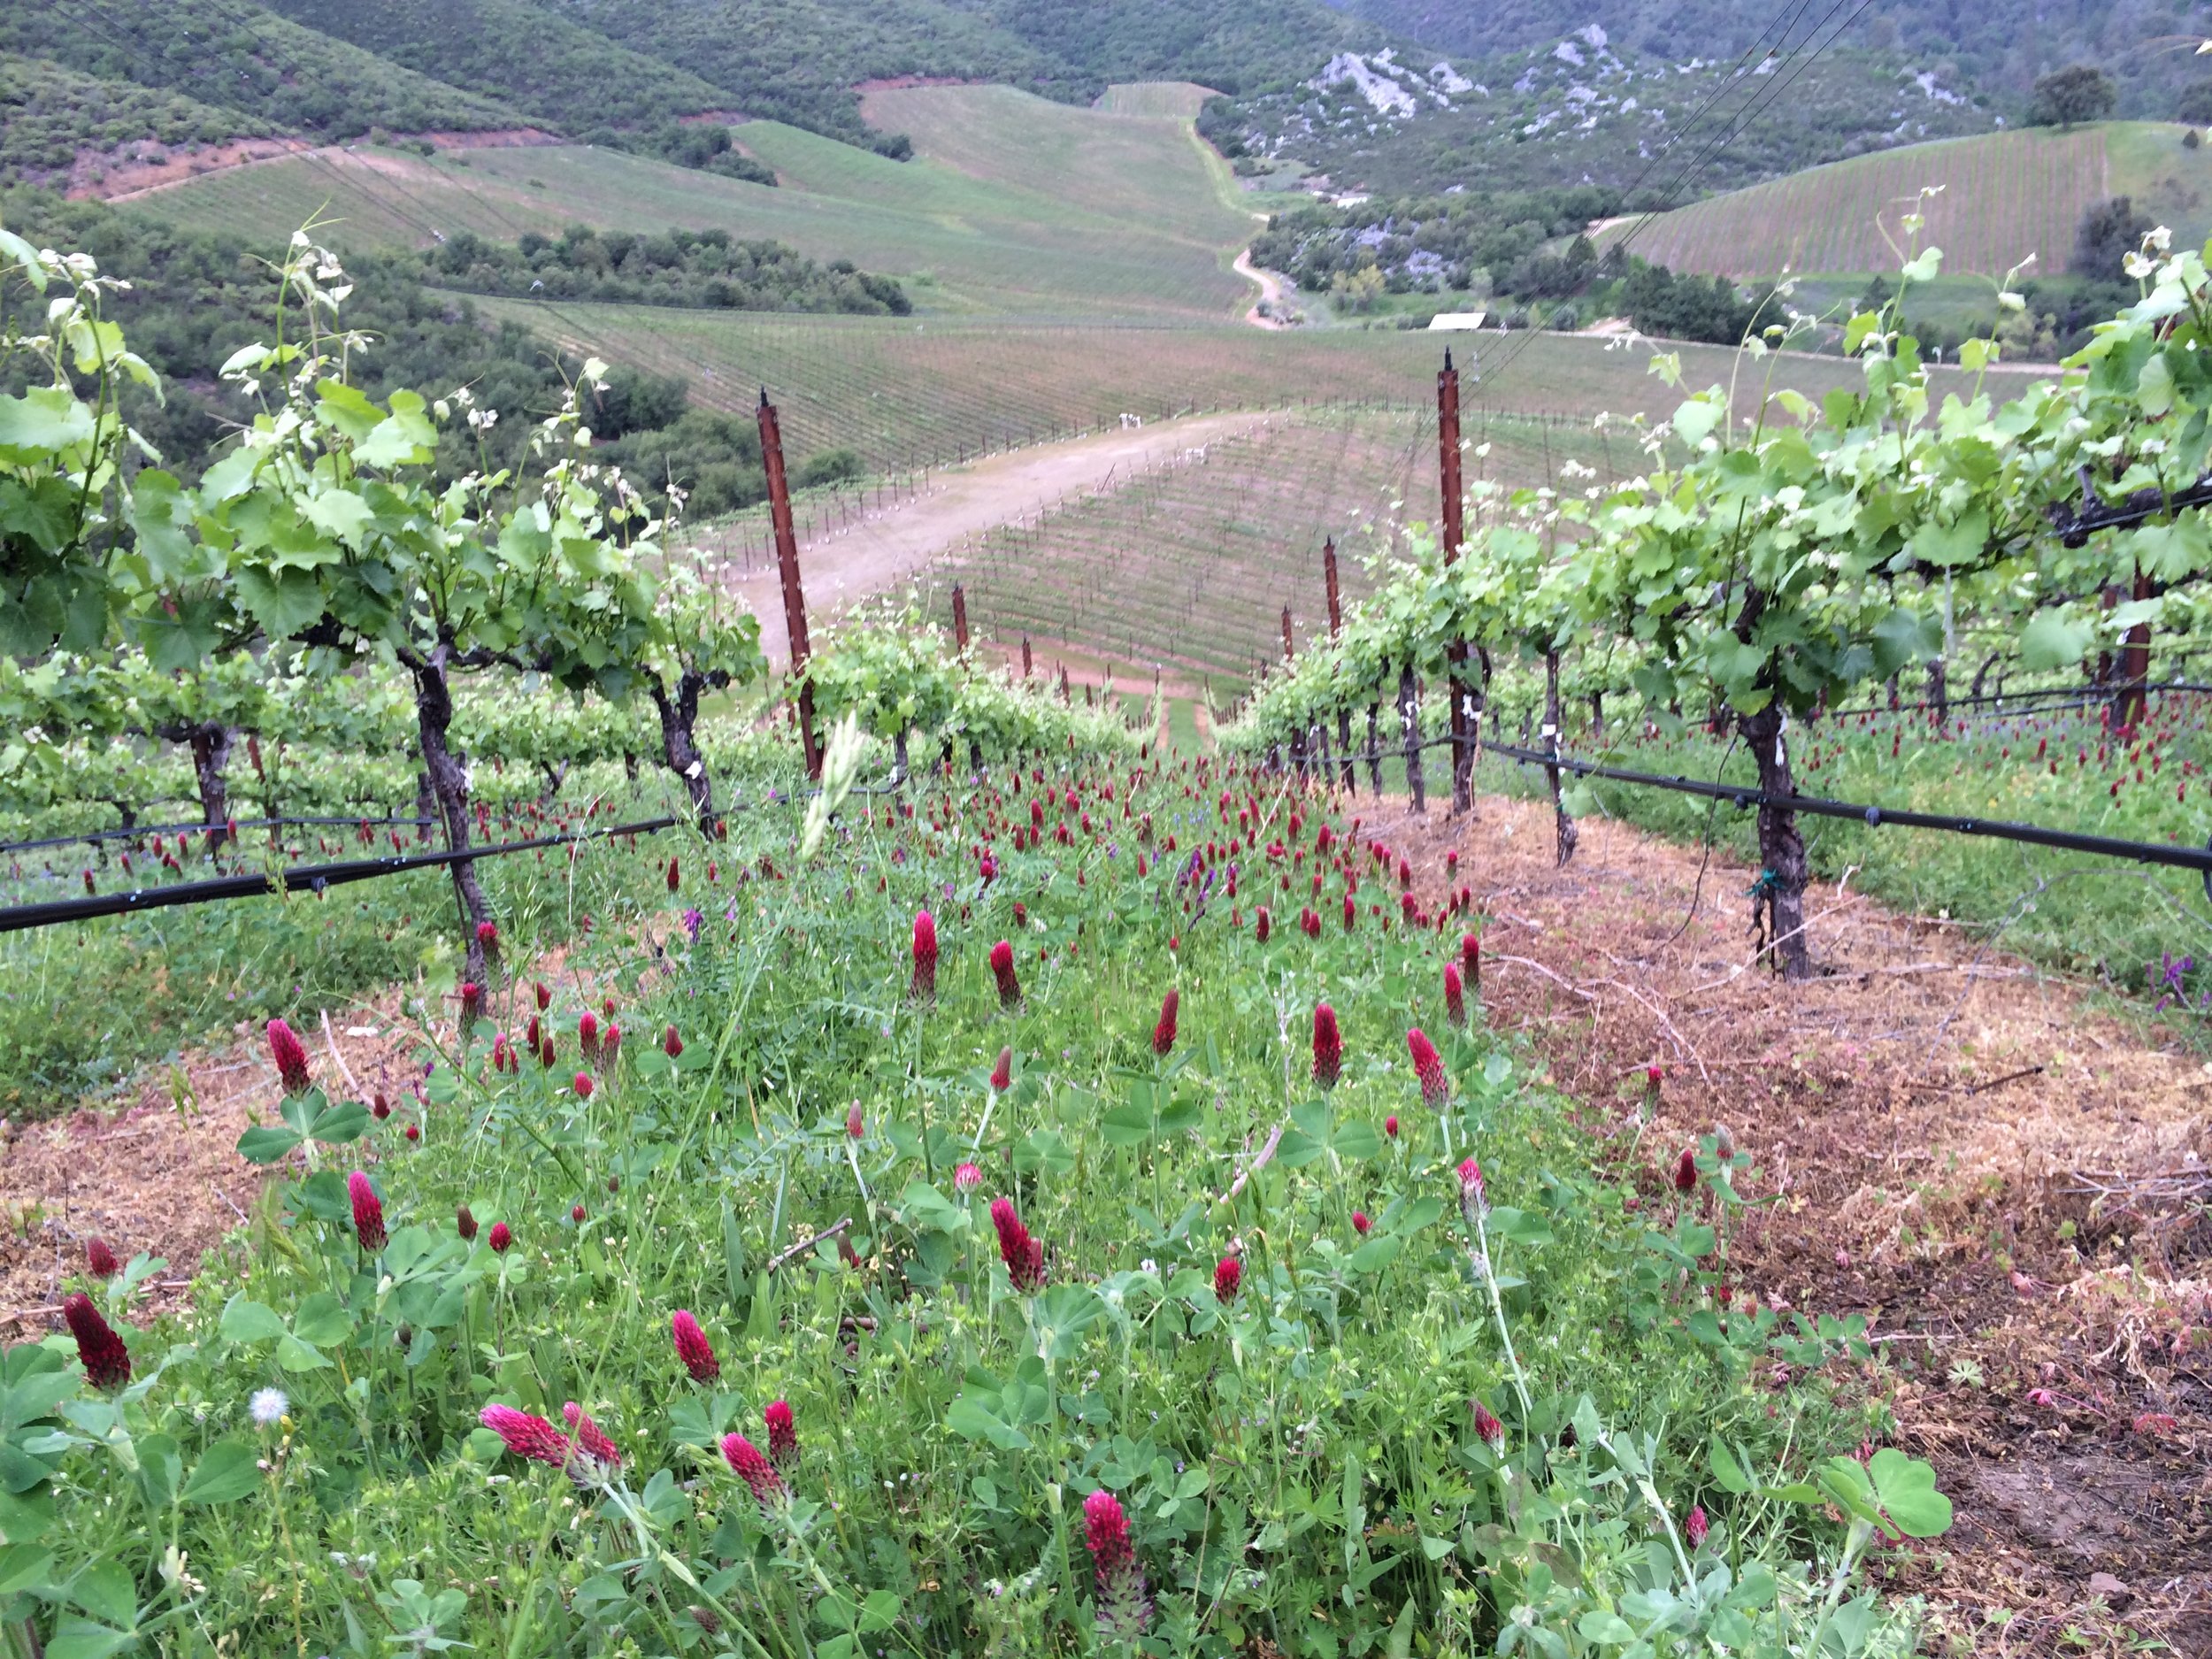 Steep row of vines with cover crop